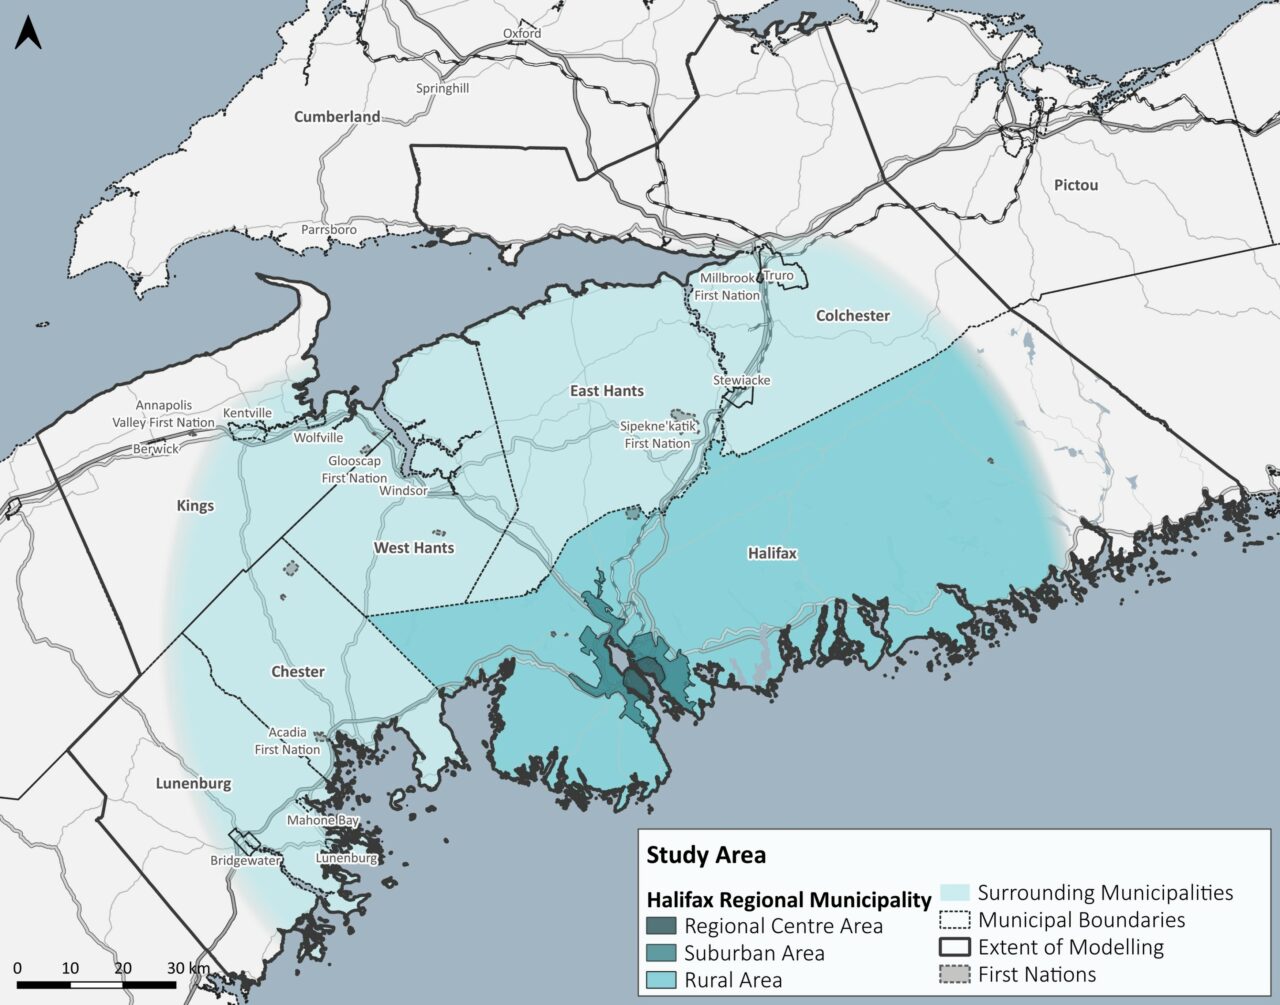 A map shows the study area for the regional transportation plan. It includes most of HRM, all of East Hants, all of West Hants, Chester, Mahone Bay, Lunenburg, Bridgewater, Wolfville, Kentville, Truro, Stewiacke, Millbrook First Nation, Sipekne'katik First Nation, Glooscap First nation, Windsor, Acadia First Nation, and Annapolis Valley First Nation